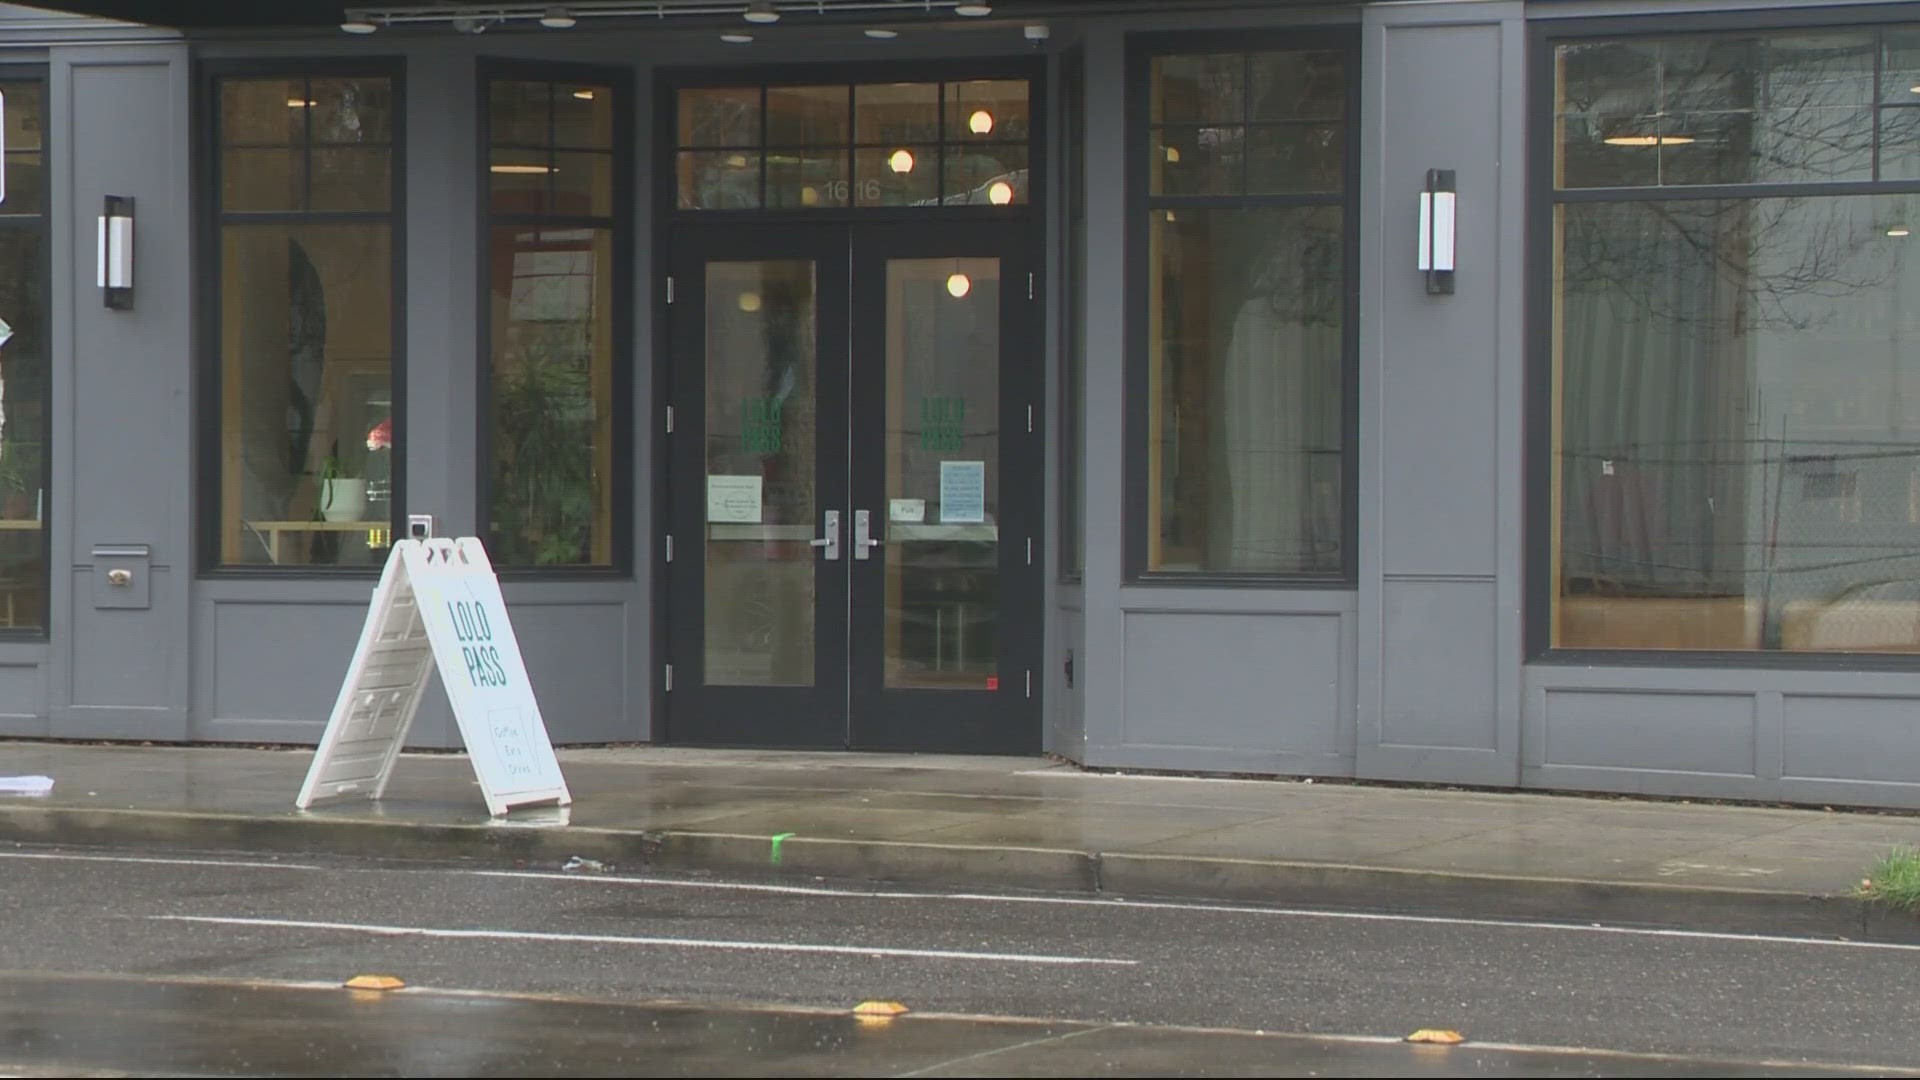 Governor Tina Kotek announced Wednesday plans to open a new treatment center in Portland’s Central Eastside to provide 70 treatment beds and temporary housing.